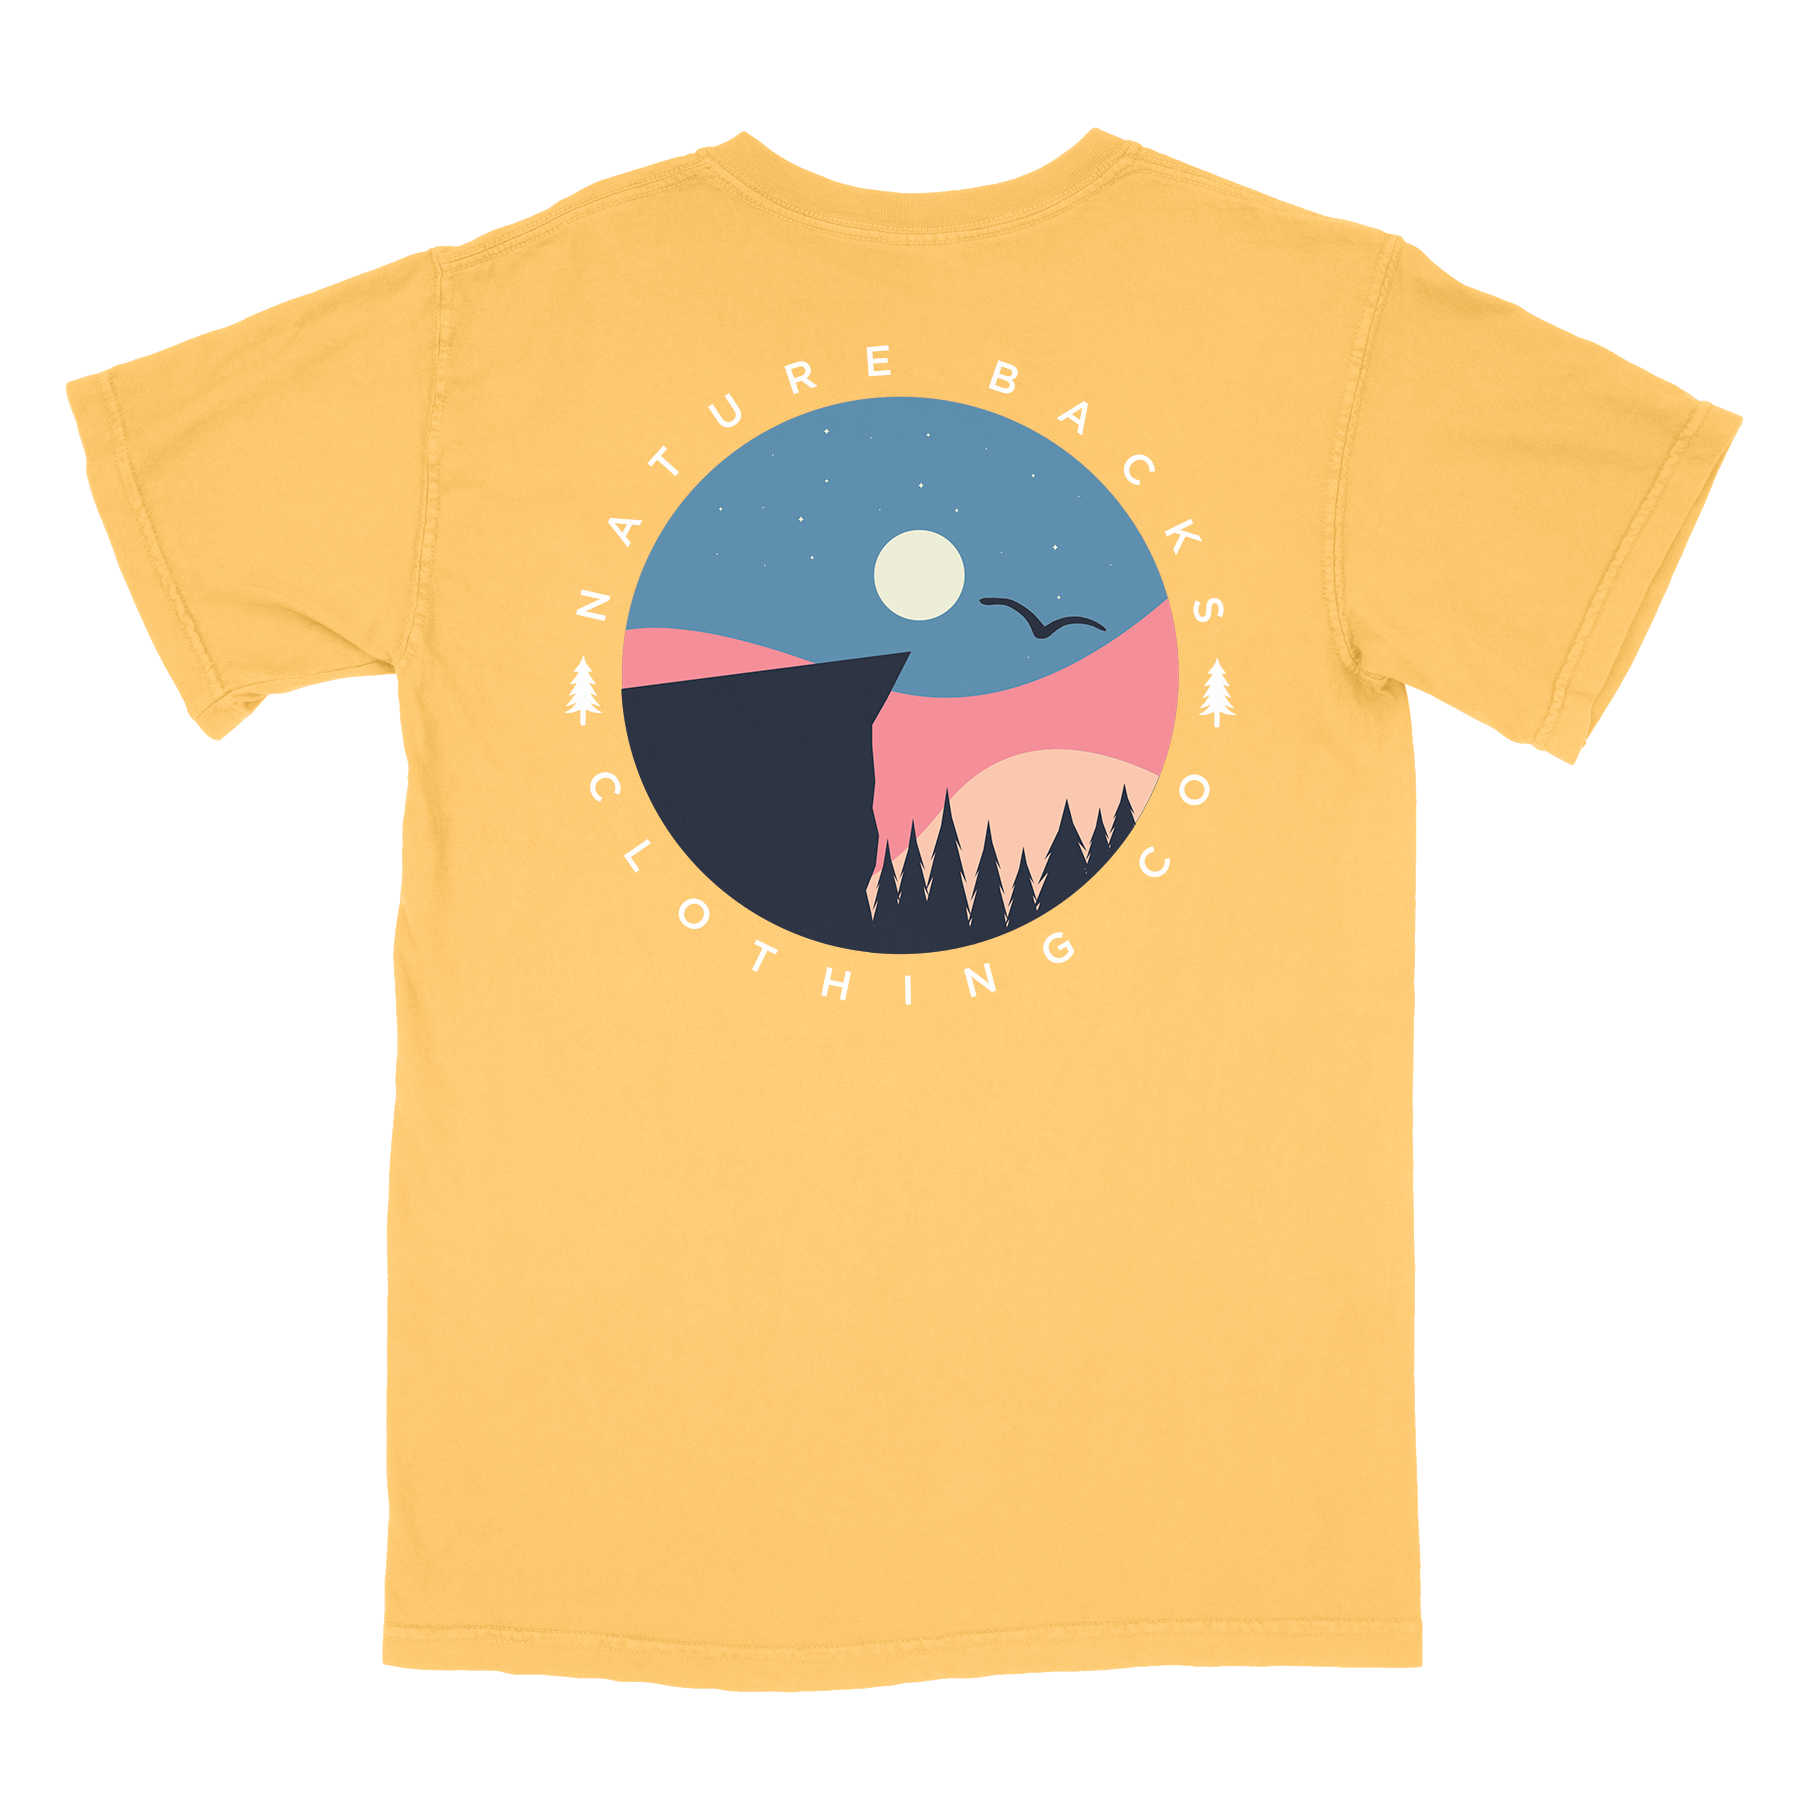 Nature Backs Comfort Colors Cliff Citrus Short Sleeve T-Shirt | Nature-Inspired Design on Ultra-Soft Fabric